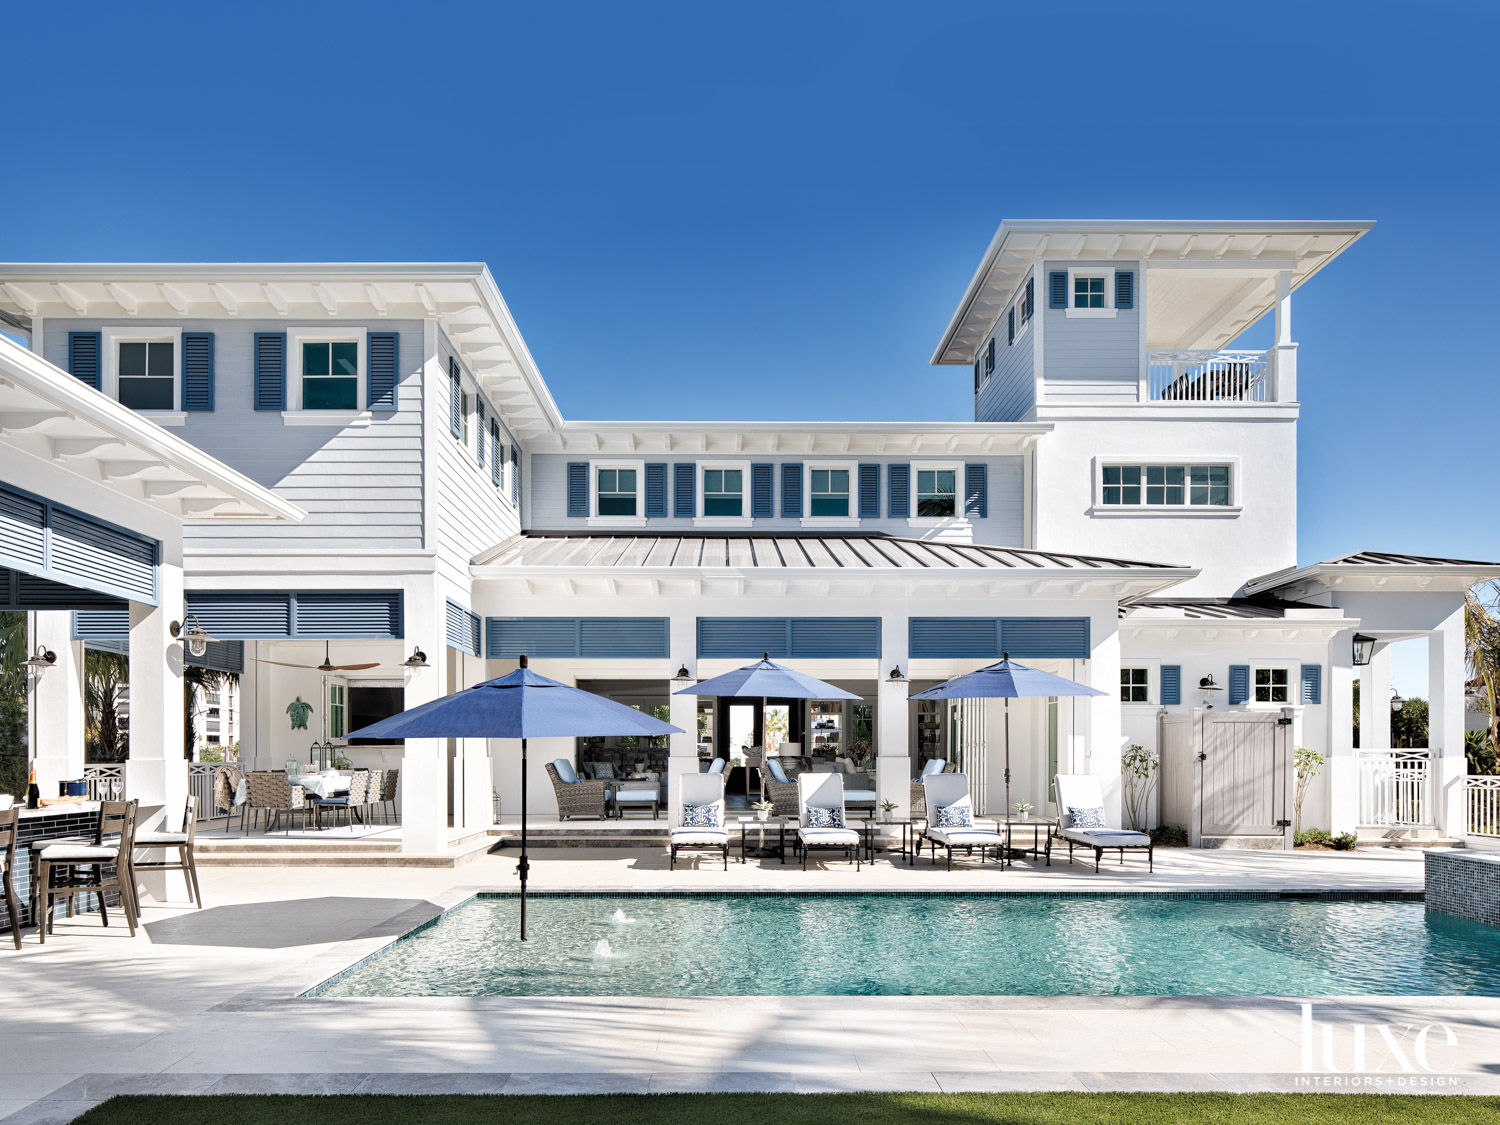 back pool area of two-story gray-and-blue residence